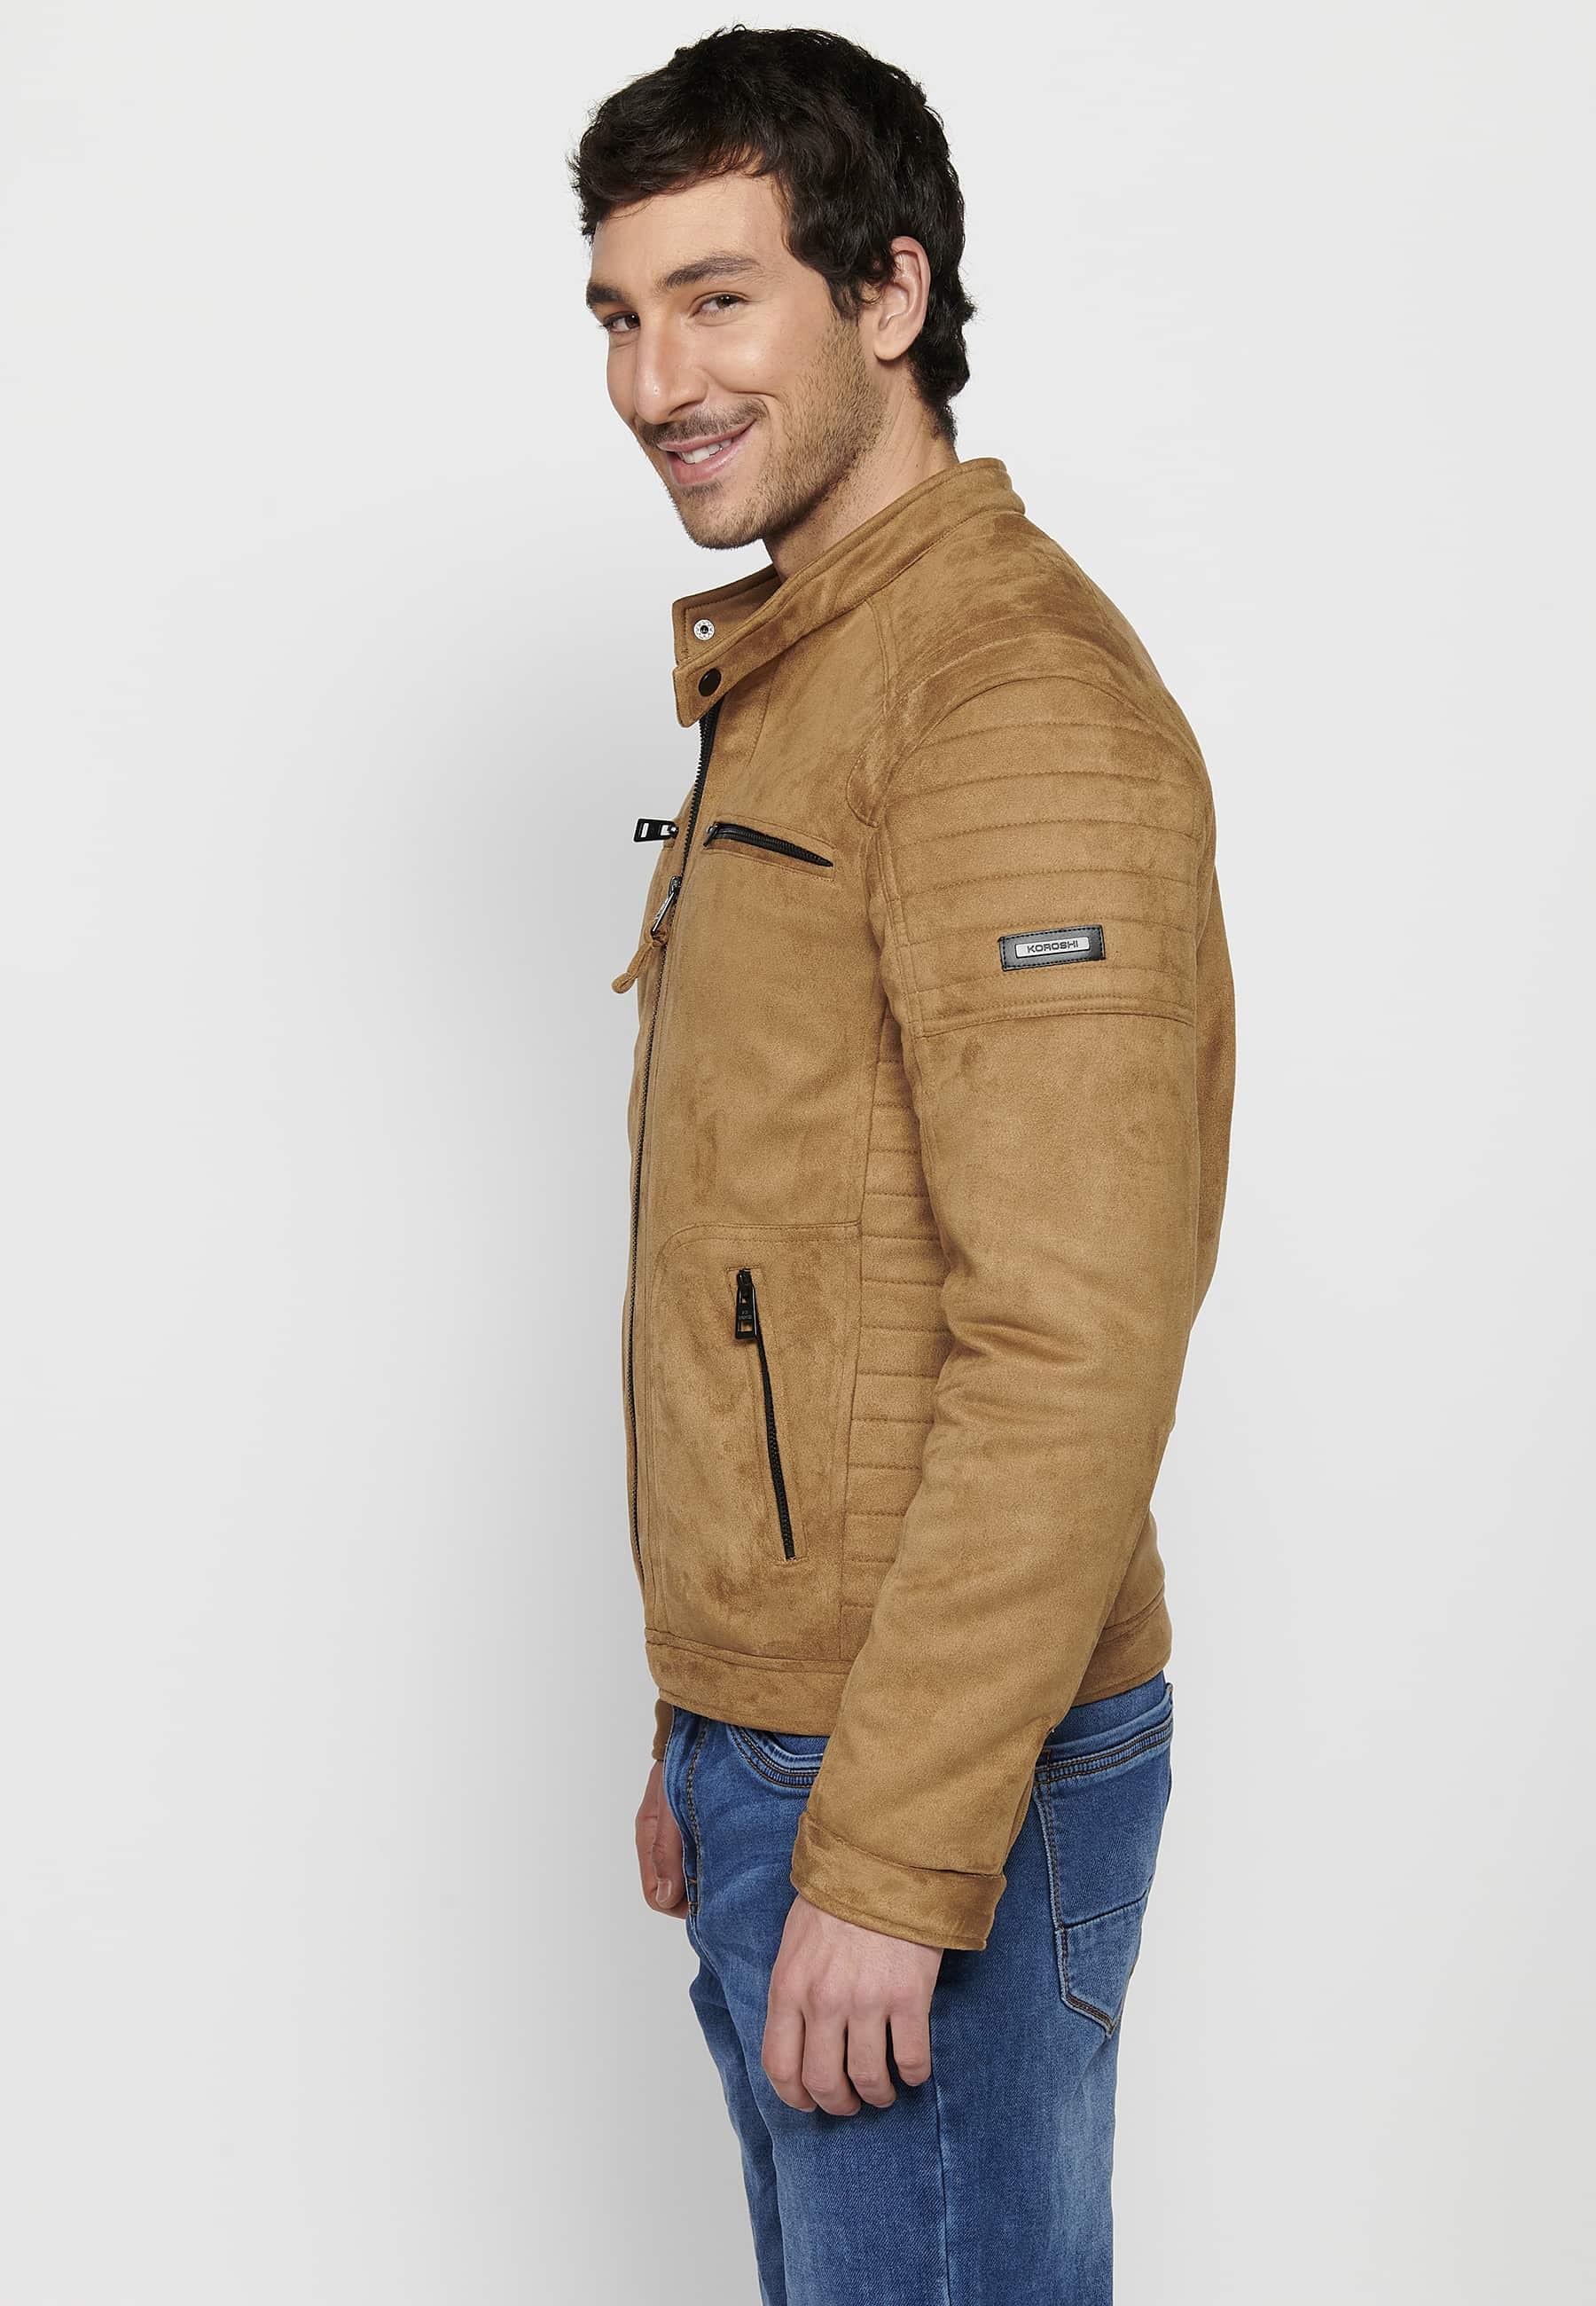 Men's Long Sleeve Jacket with Round Neck and Zipper Front Closure with Four Pockets in Tan Color 5